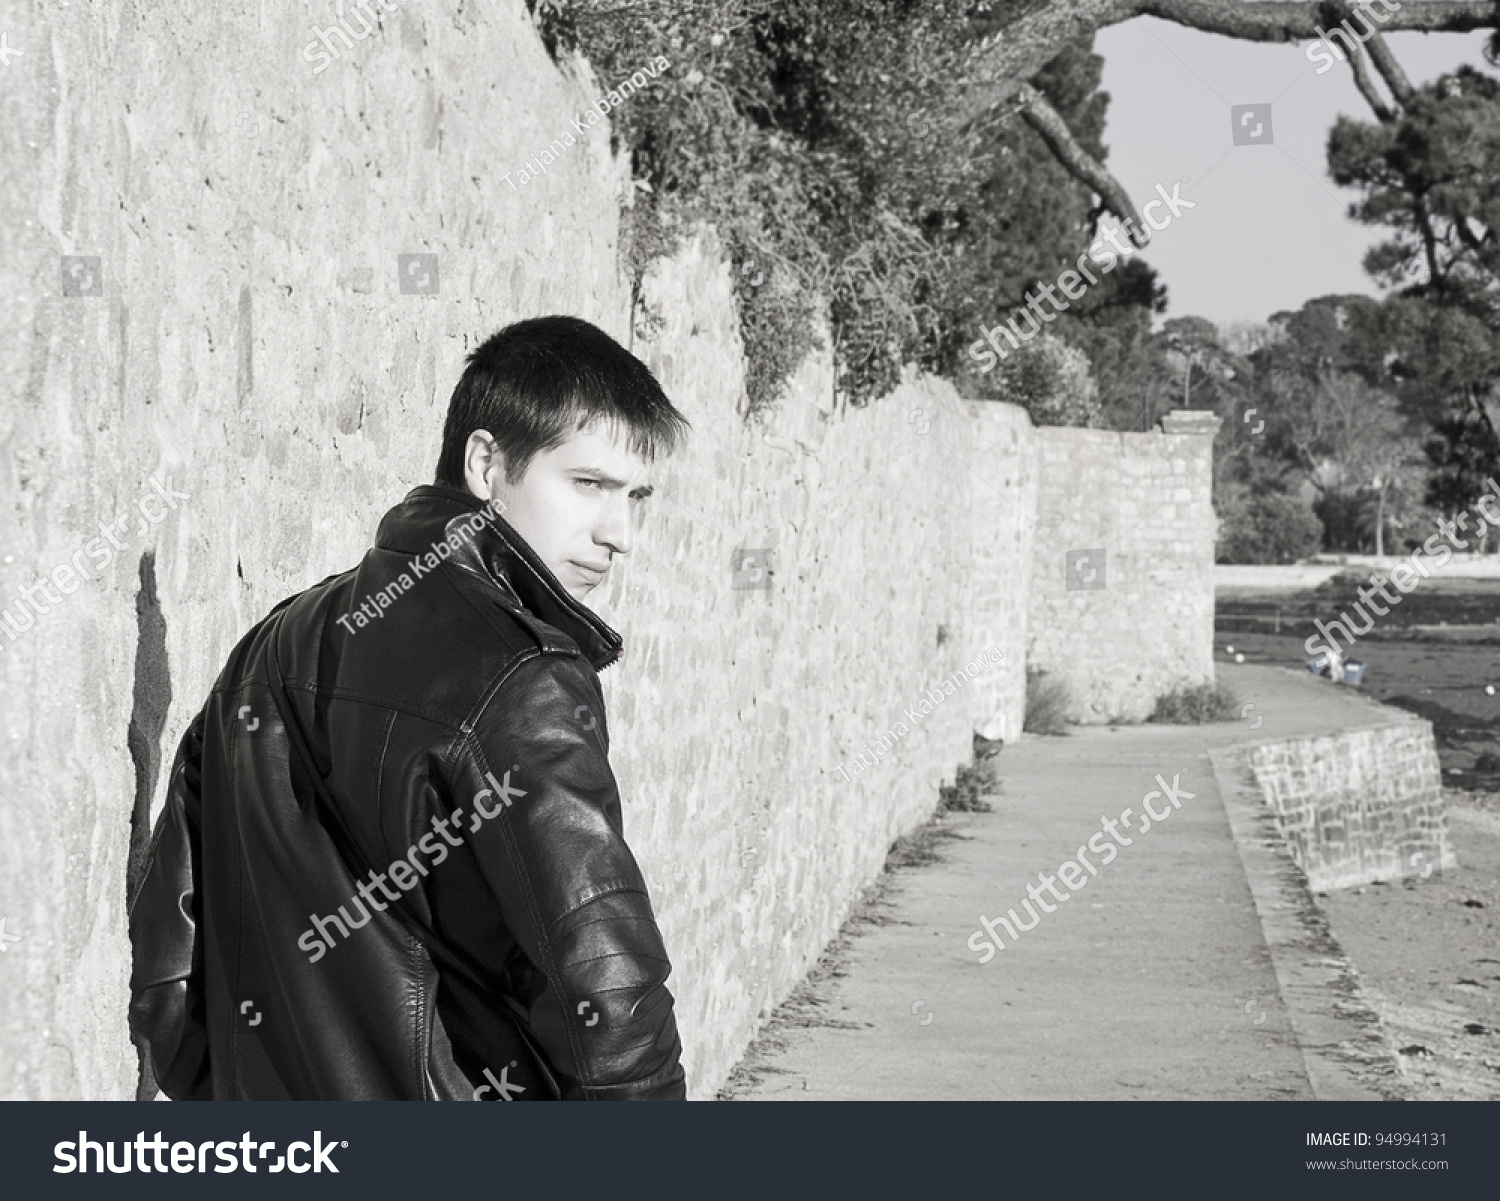 Young Handsome Man Black Leather Jacket Stock Photo 94994131 - Shutterstock